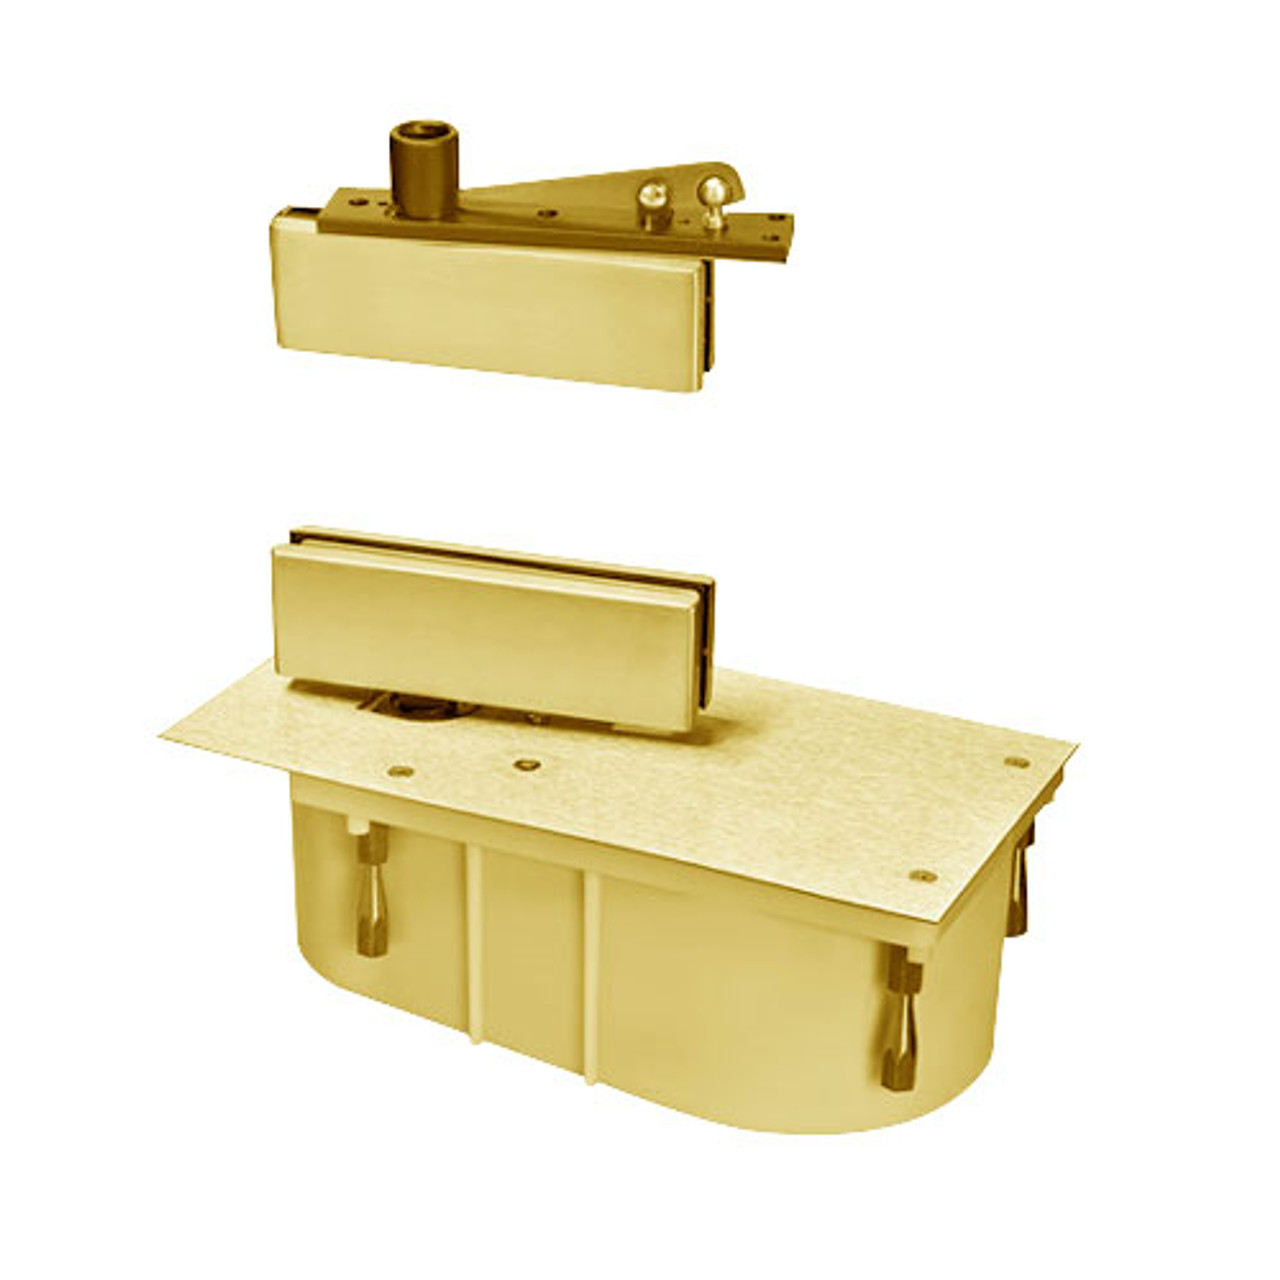 SC428-105N-CWF-RH-605 Rixson 428 Series Heavy Duty Single Acting Center Hung Floor Closer with Patch Fittings in Bright Brass Finish